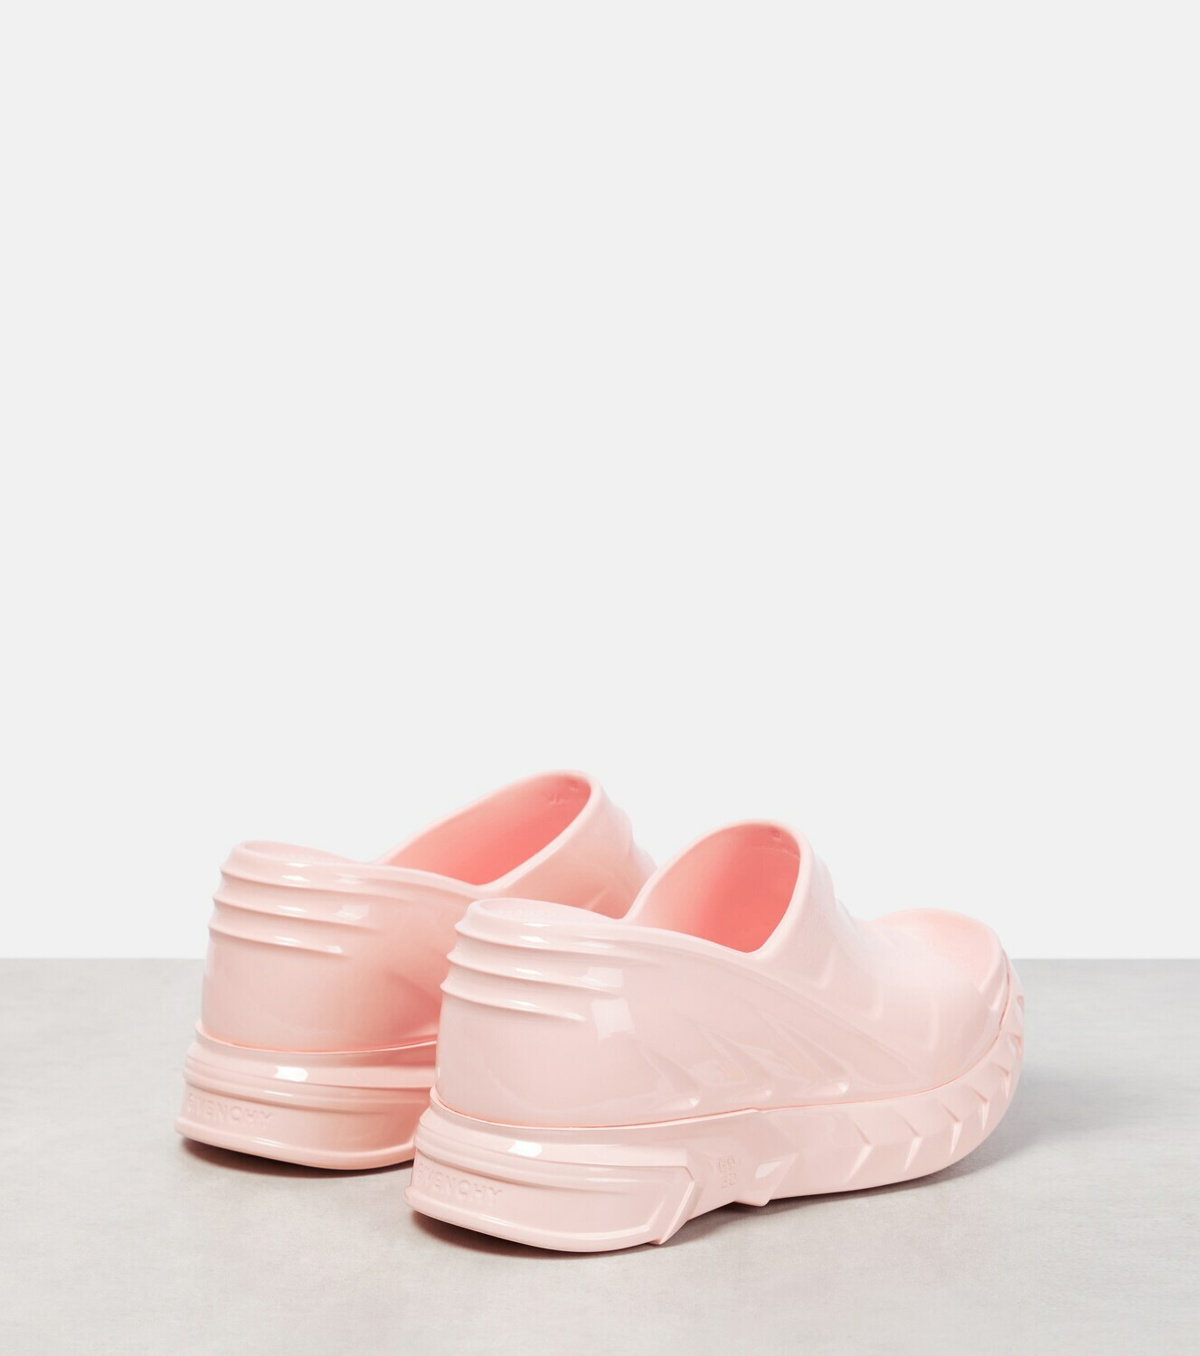 Givenchy Marshmallow wedge sandals Givenchy